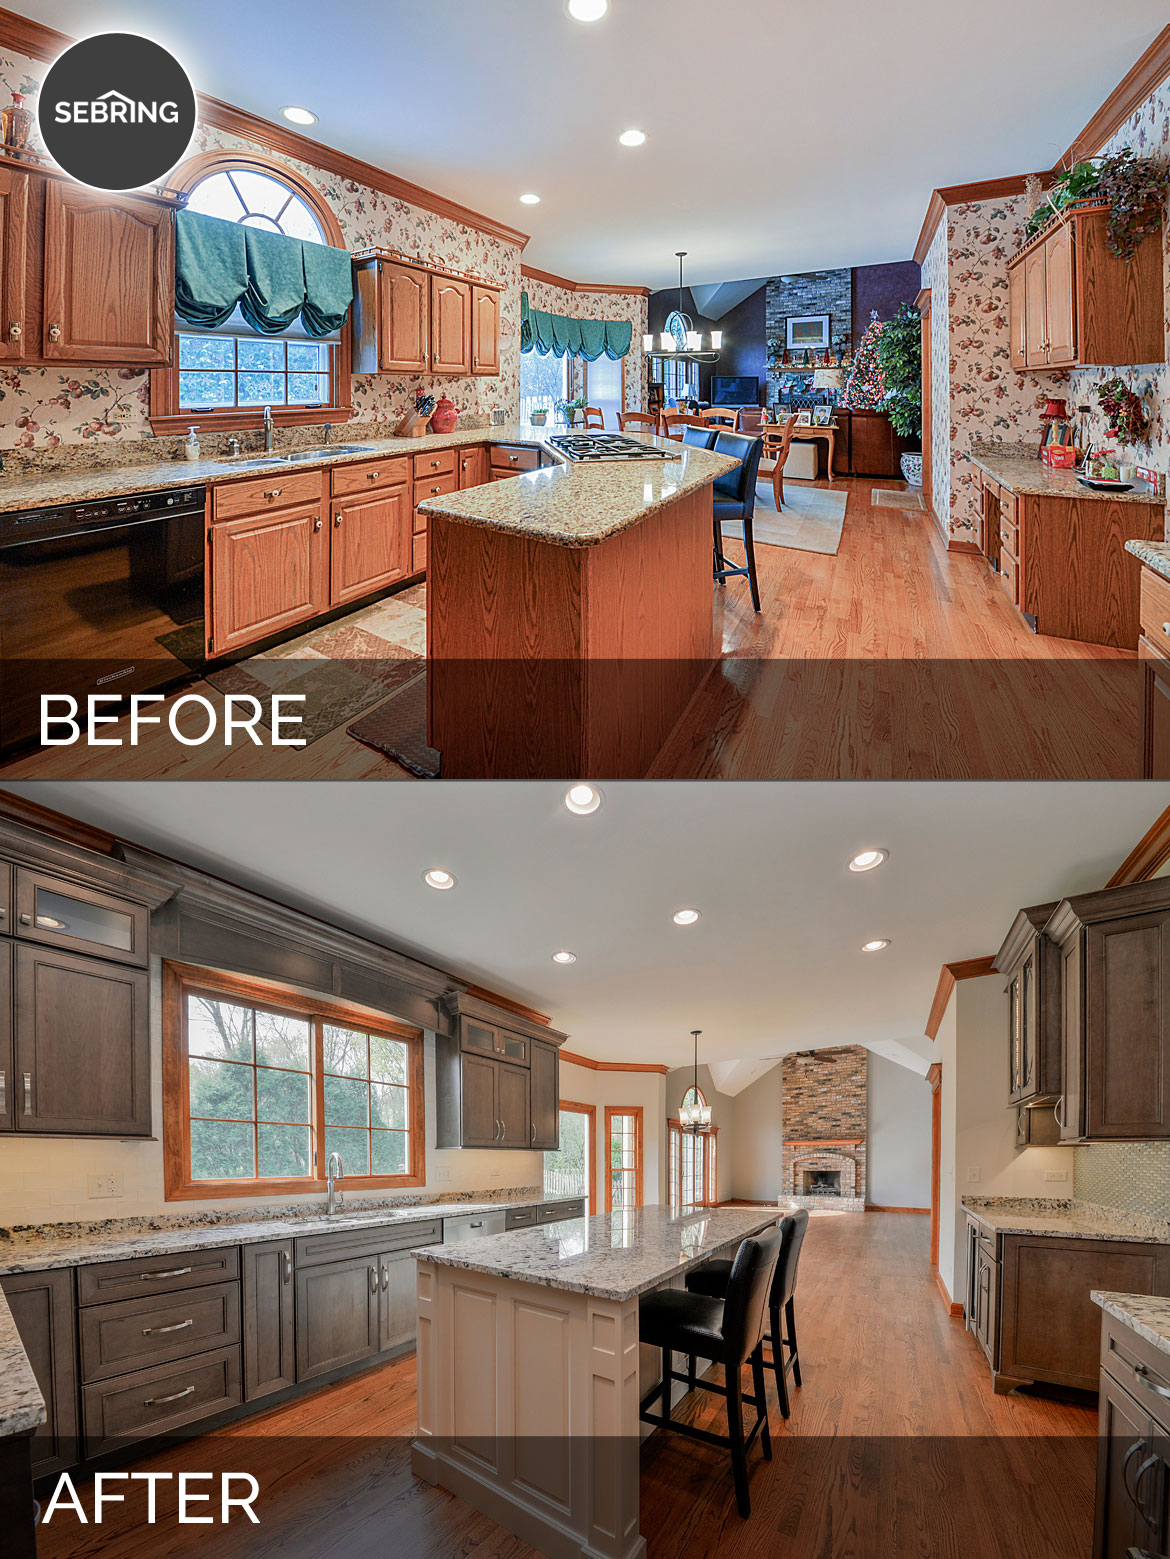 Before And After Kitchen Remodeling 233135 Sebring Services 